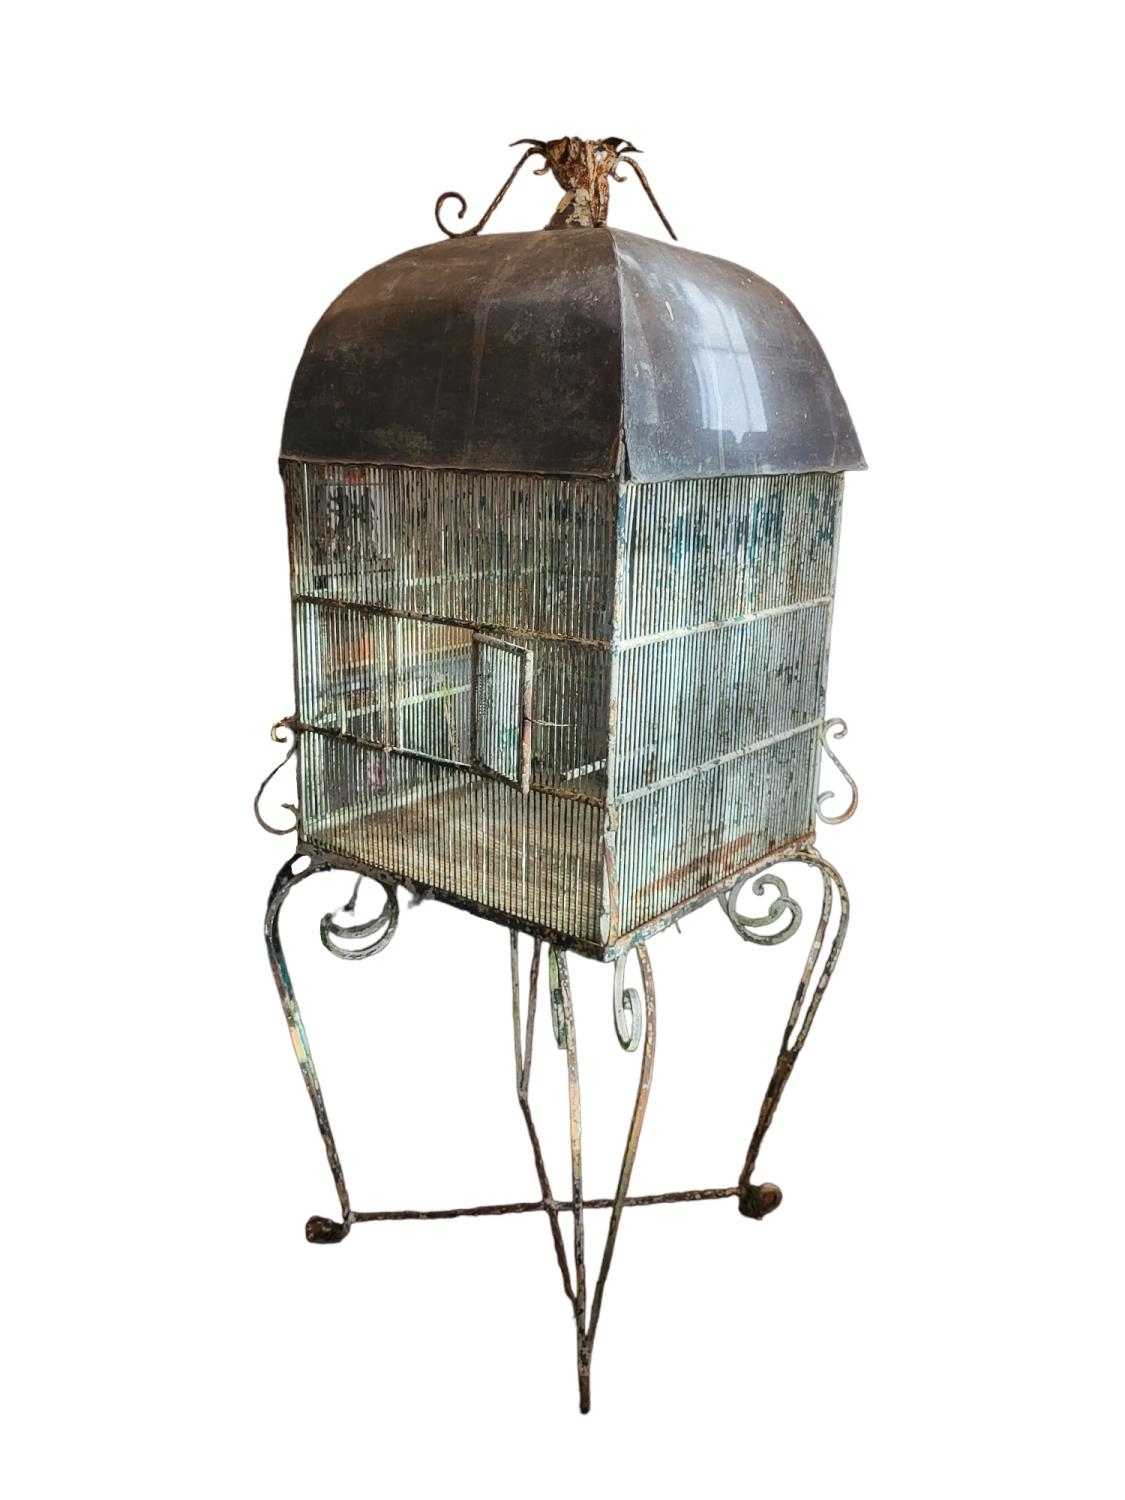 A LARGE 19TH CENTURY PAINTED IRON AND ZINC DOMED TOPPED BIRDCAGE ON WROUGHT IRON SCROLL WORK